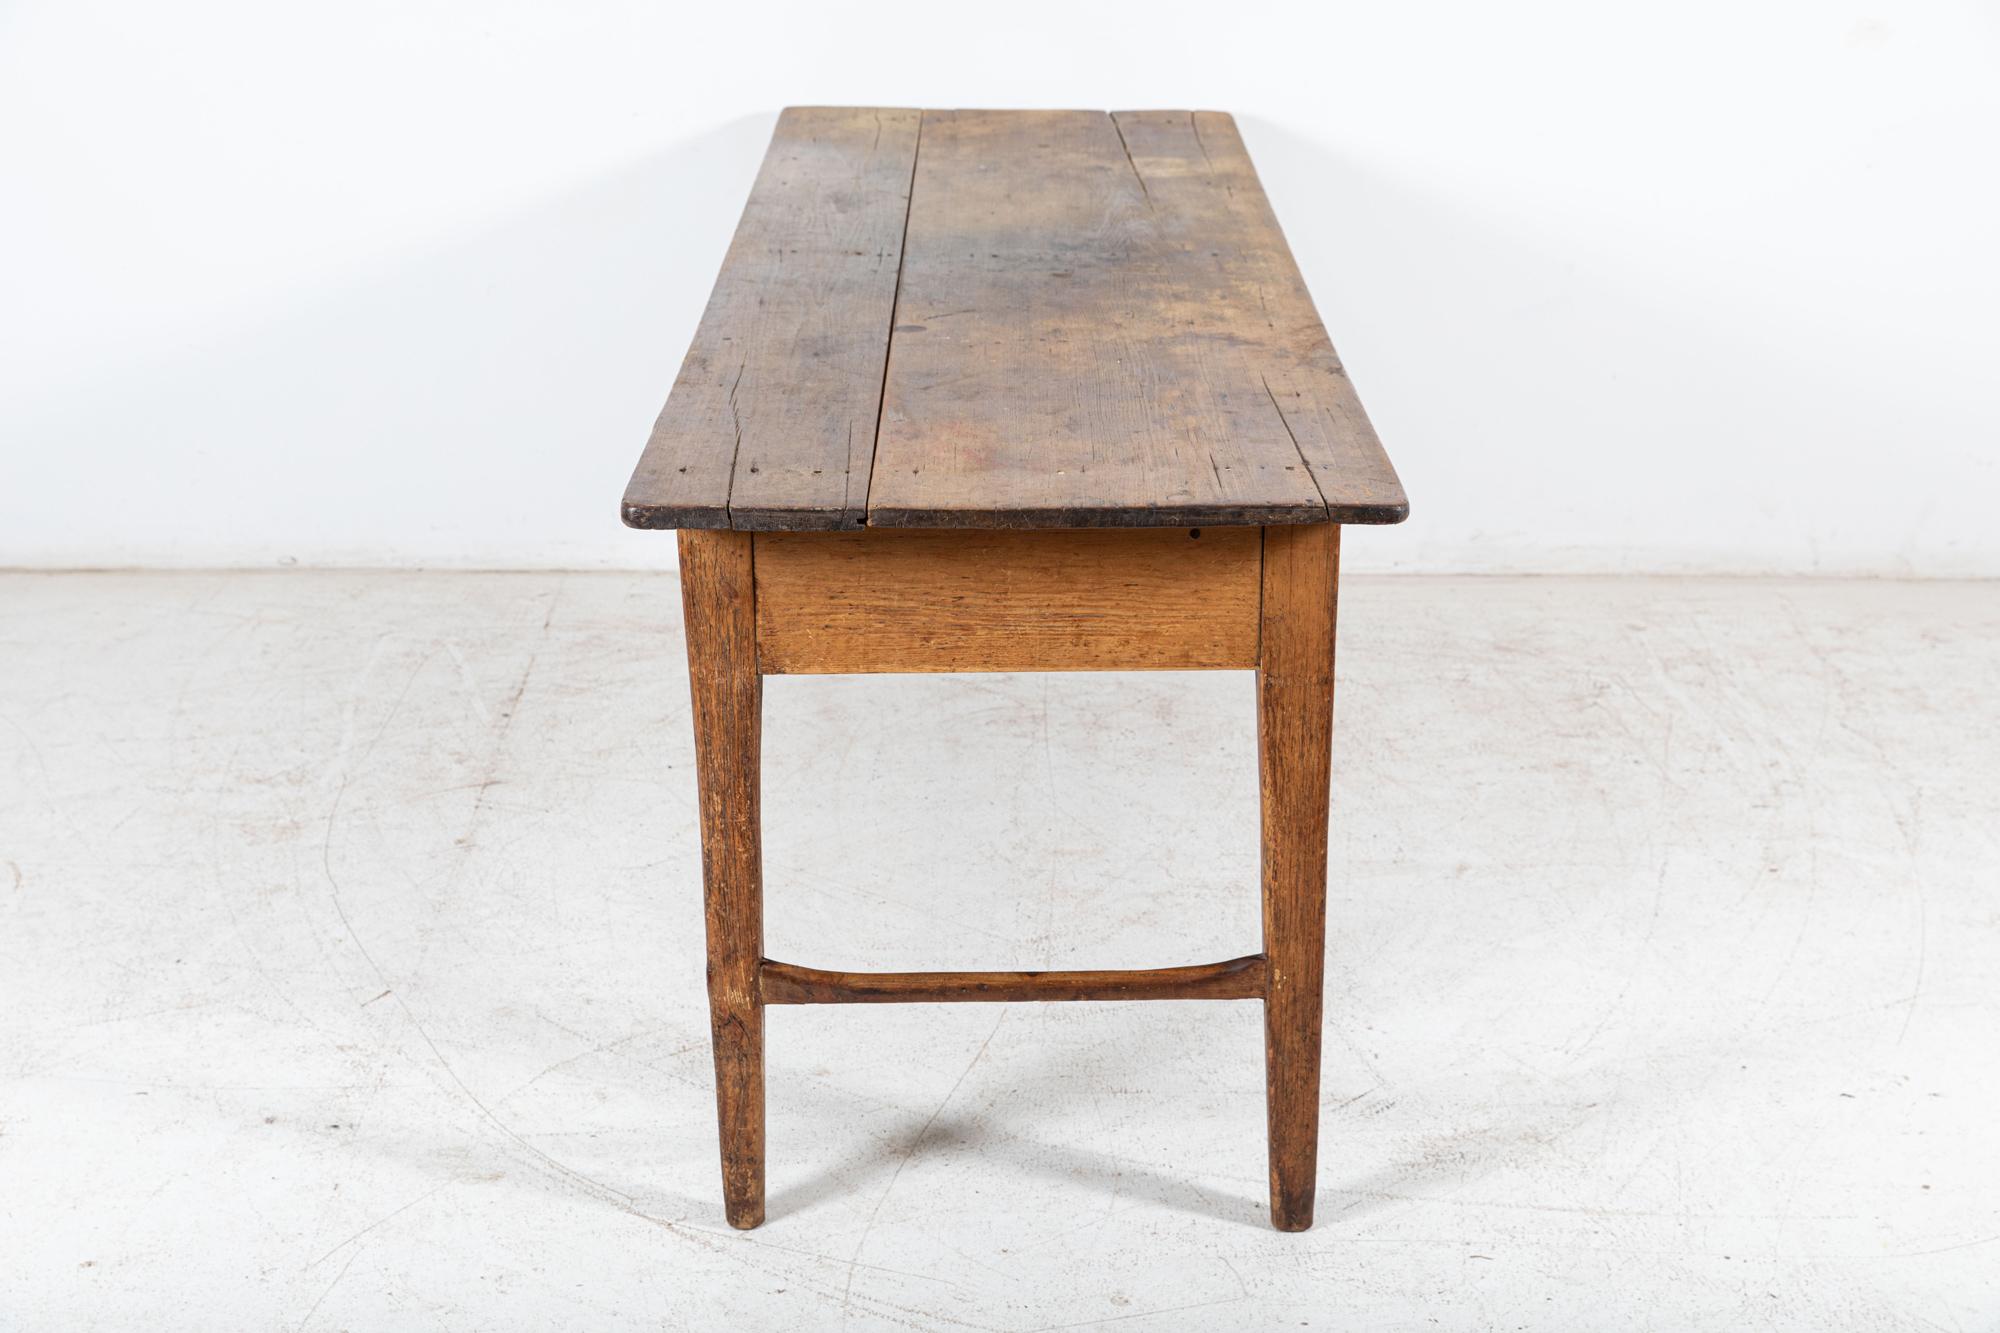 19thC Large English Vernacular 2 Plank Work Table In Good Condition For Sale In Staffordshire, GB